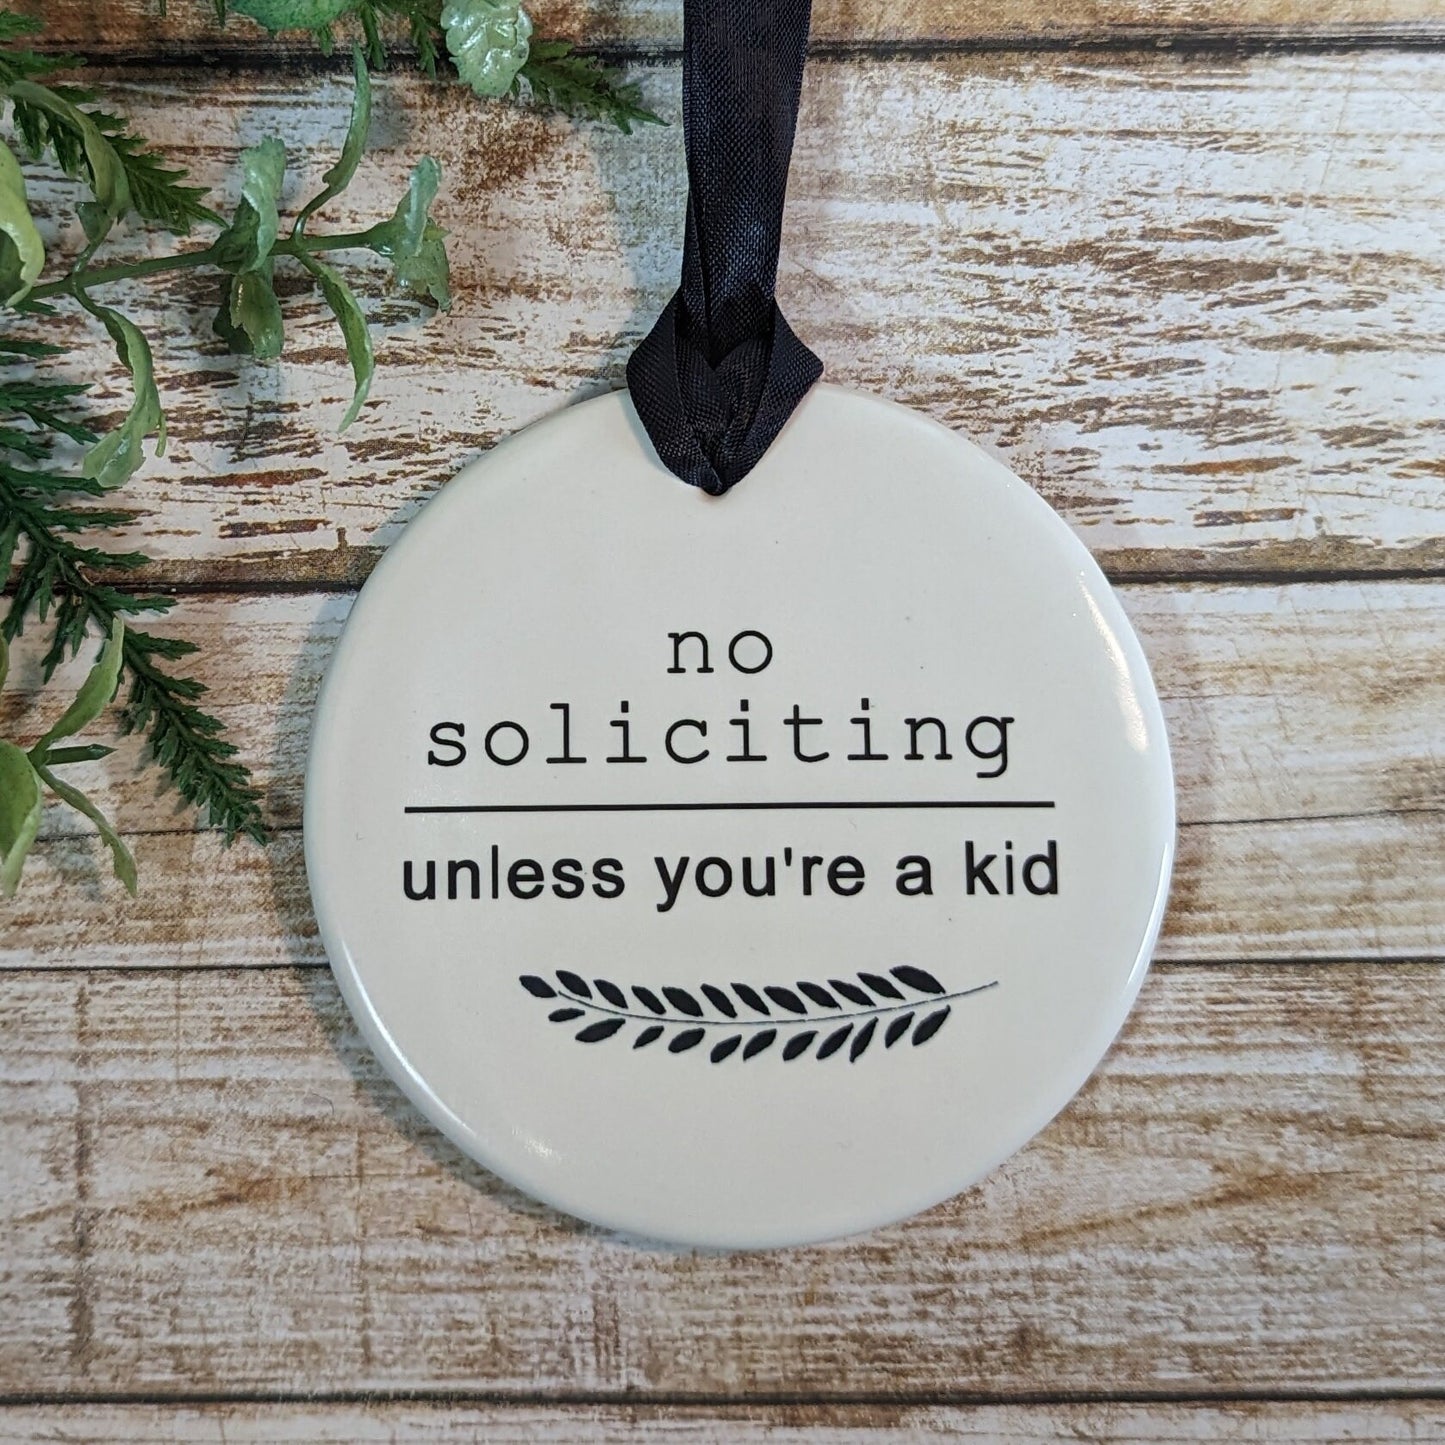 Sign Thin Mints, No Soliciting Sign, No Soliciting, Kid's Welcome - Sign No Soliciting, Ceramic Sign - different sizes and styles available